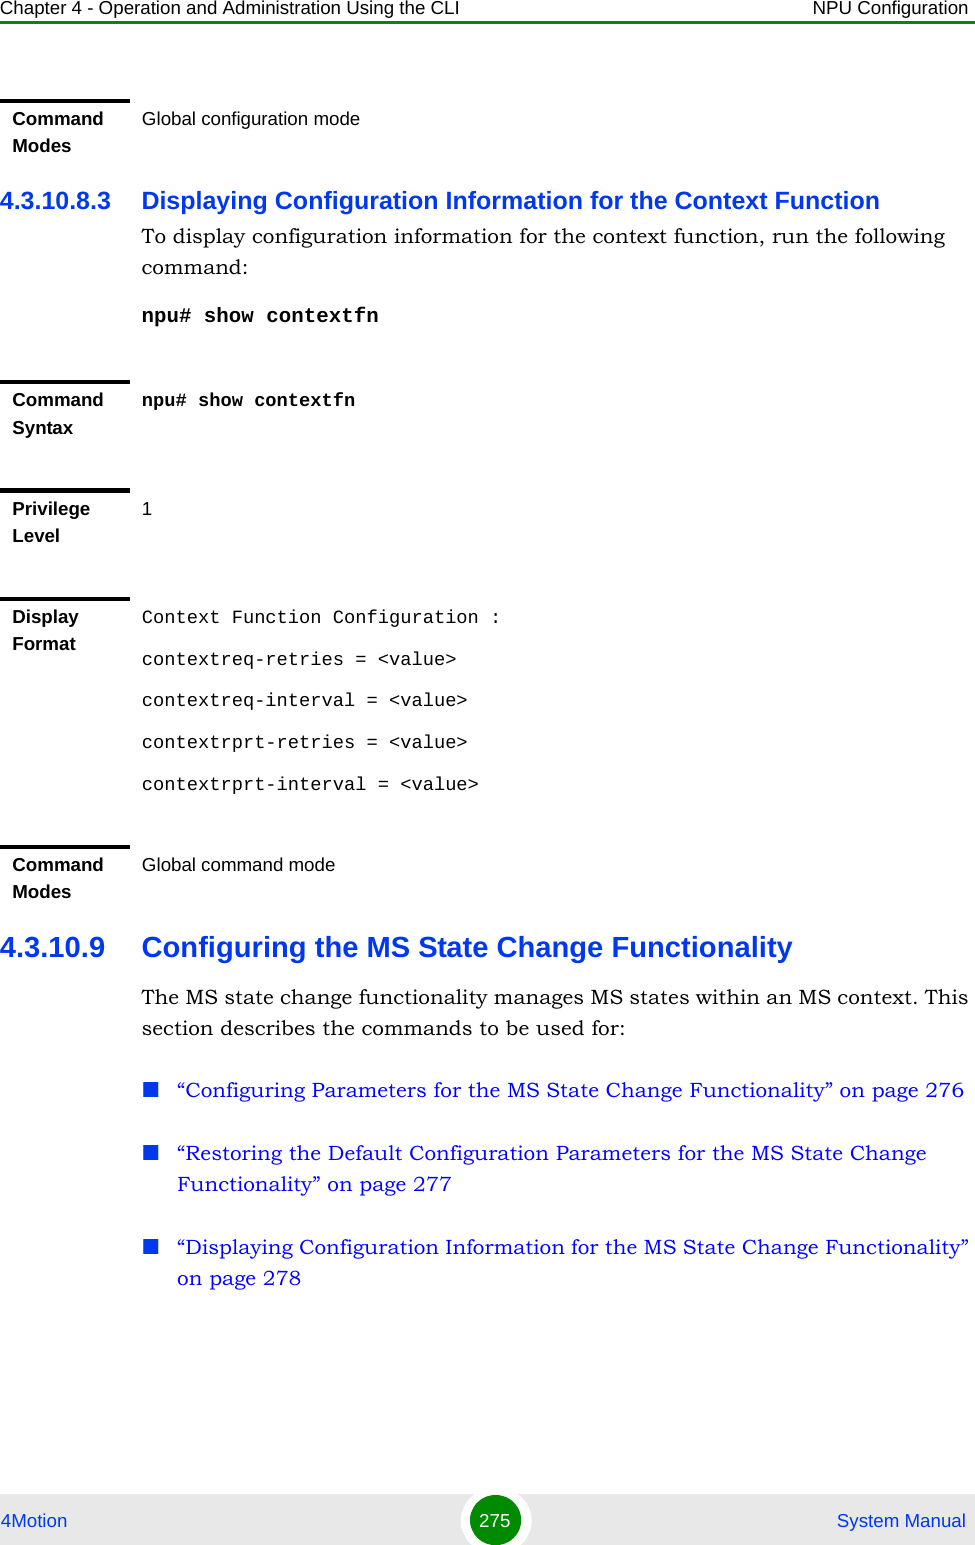 Chapter 4 - Operation and Administration Using the CLI NPU Configuration4Motion 275  System Manual4.3.10.8.3 Displaying Configuration Information for the Context Function To display configuration information for the context function, run the following command:npu# show contextfn4.3.10.9 Configuring the MS State Change FunctionalityThe MS state change functionality manages MS states within an MS context. This section describes the commands to be used for: “Configuring Parameters for the MS State Change Functionality” on page 276“Restoring the Default Configuration Parameters for the MS State Change Functionality” on page 277“Displaying Configuration Information for the MS State Change Functionality” on page 278Command ModesGlobal configuration modeCommand Syntaxnpu# show contextfnPrivilege Level1Display FormatContext Function Configuration :contextreq-retries = &lt;value&gt;contextreq-interval = &lt;value&gt;contextrprt-retries = &lt;value&gt;contextrprt-interval = &lt;value&gt;Command ModesGlobal command mode